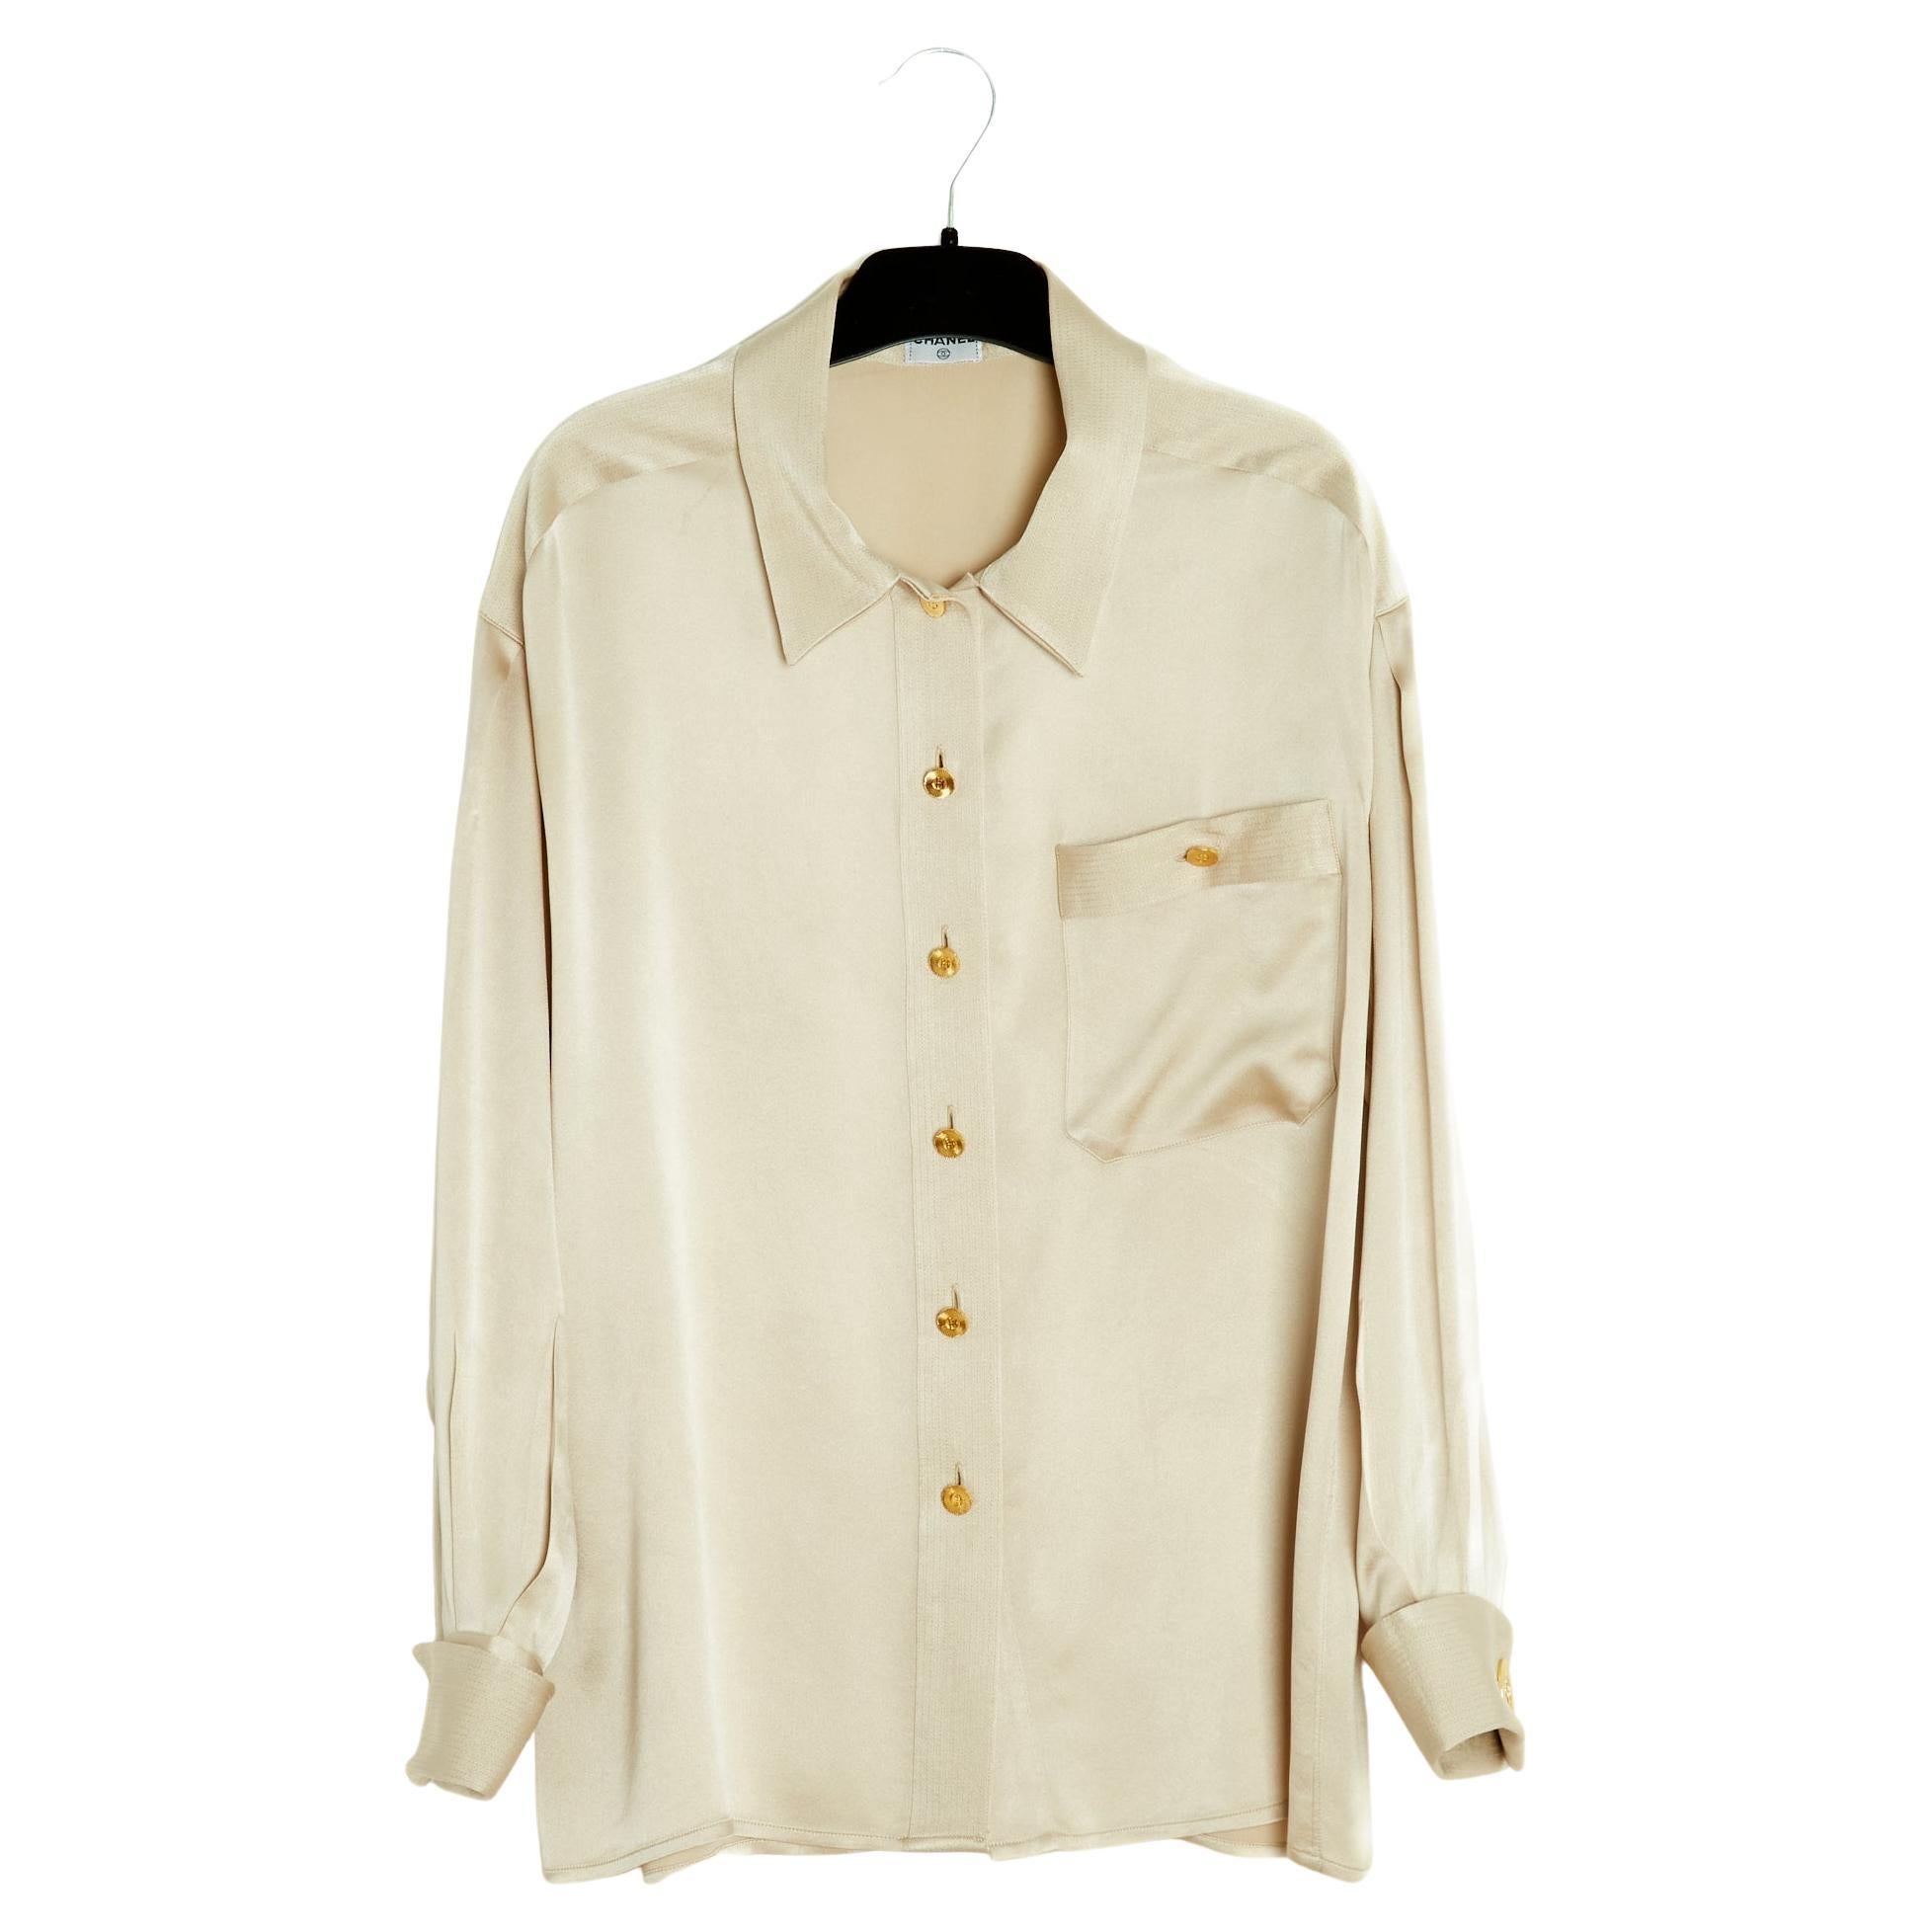 SS95 Chanel Top Blouse Champagne silk FR38